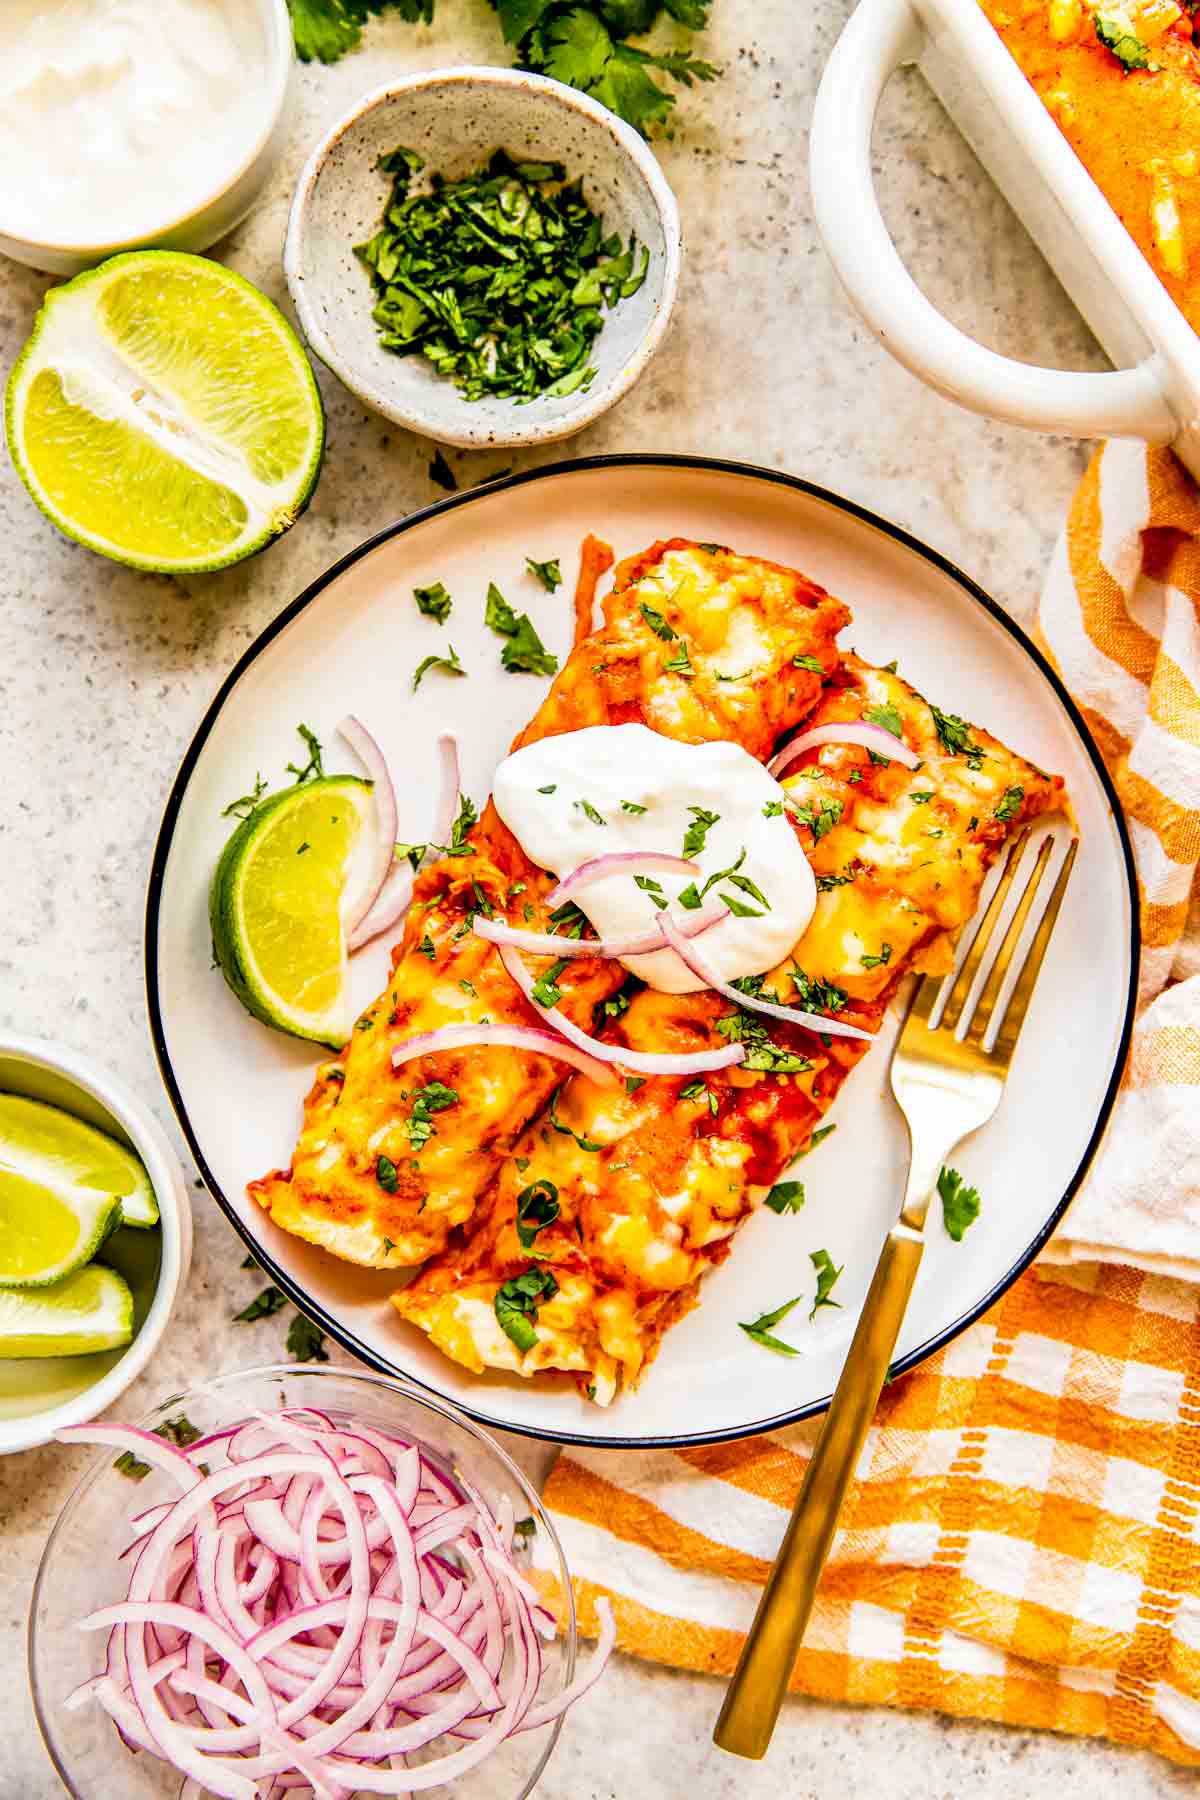 two chicken enchiladas on a plate topped with sour cream, red onions, and fresh cilantro. there is a lime and metal fork on the plate as well.